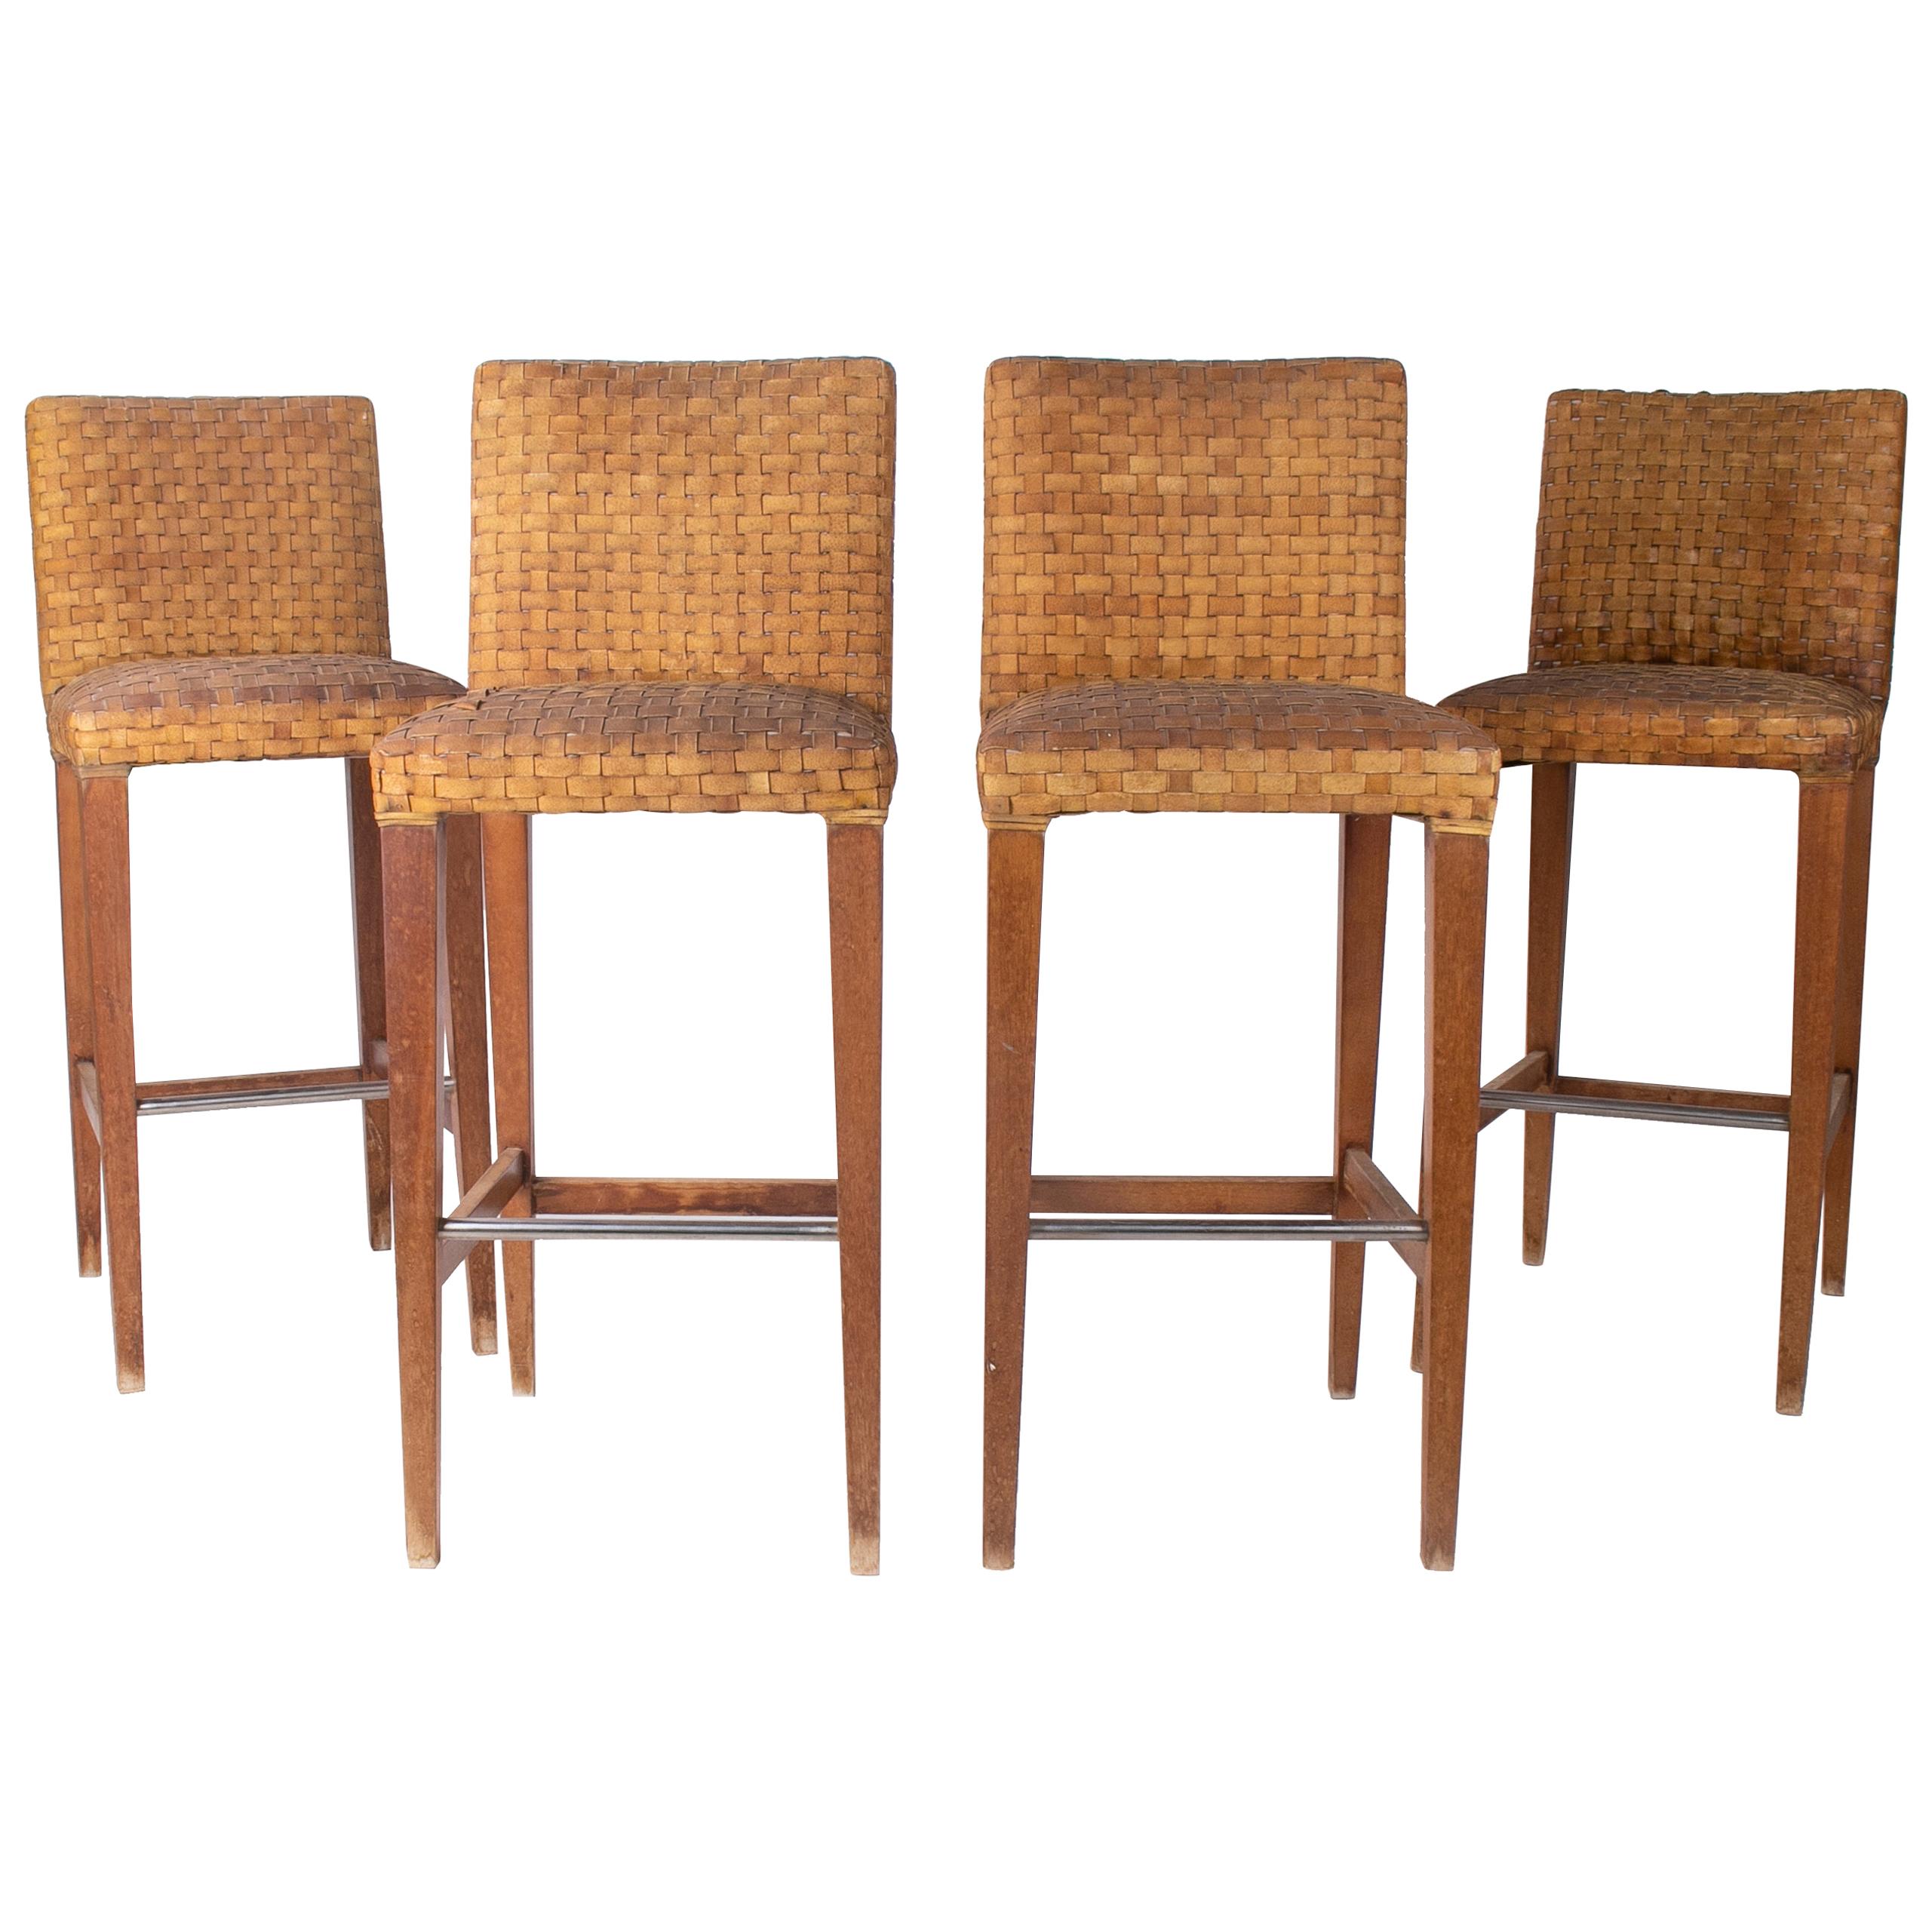 1990s Set of Four Wood and Leather Stools with Steel Foot Rests For Sale